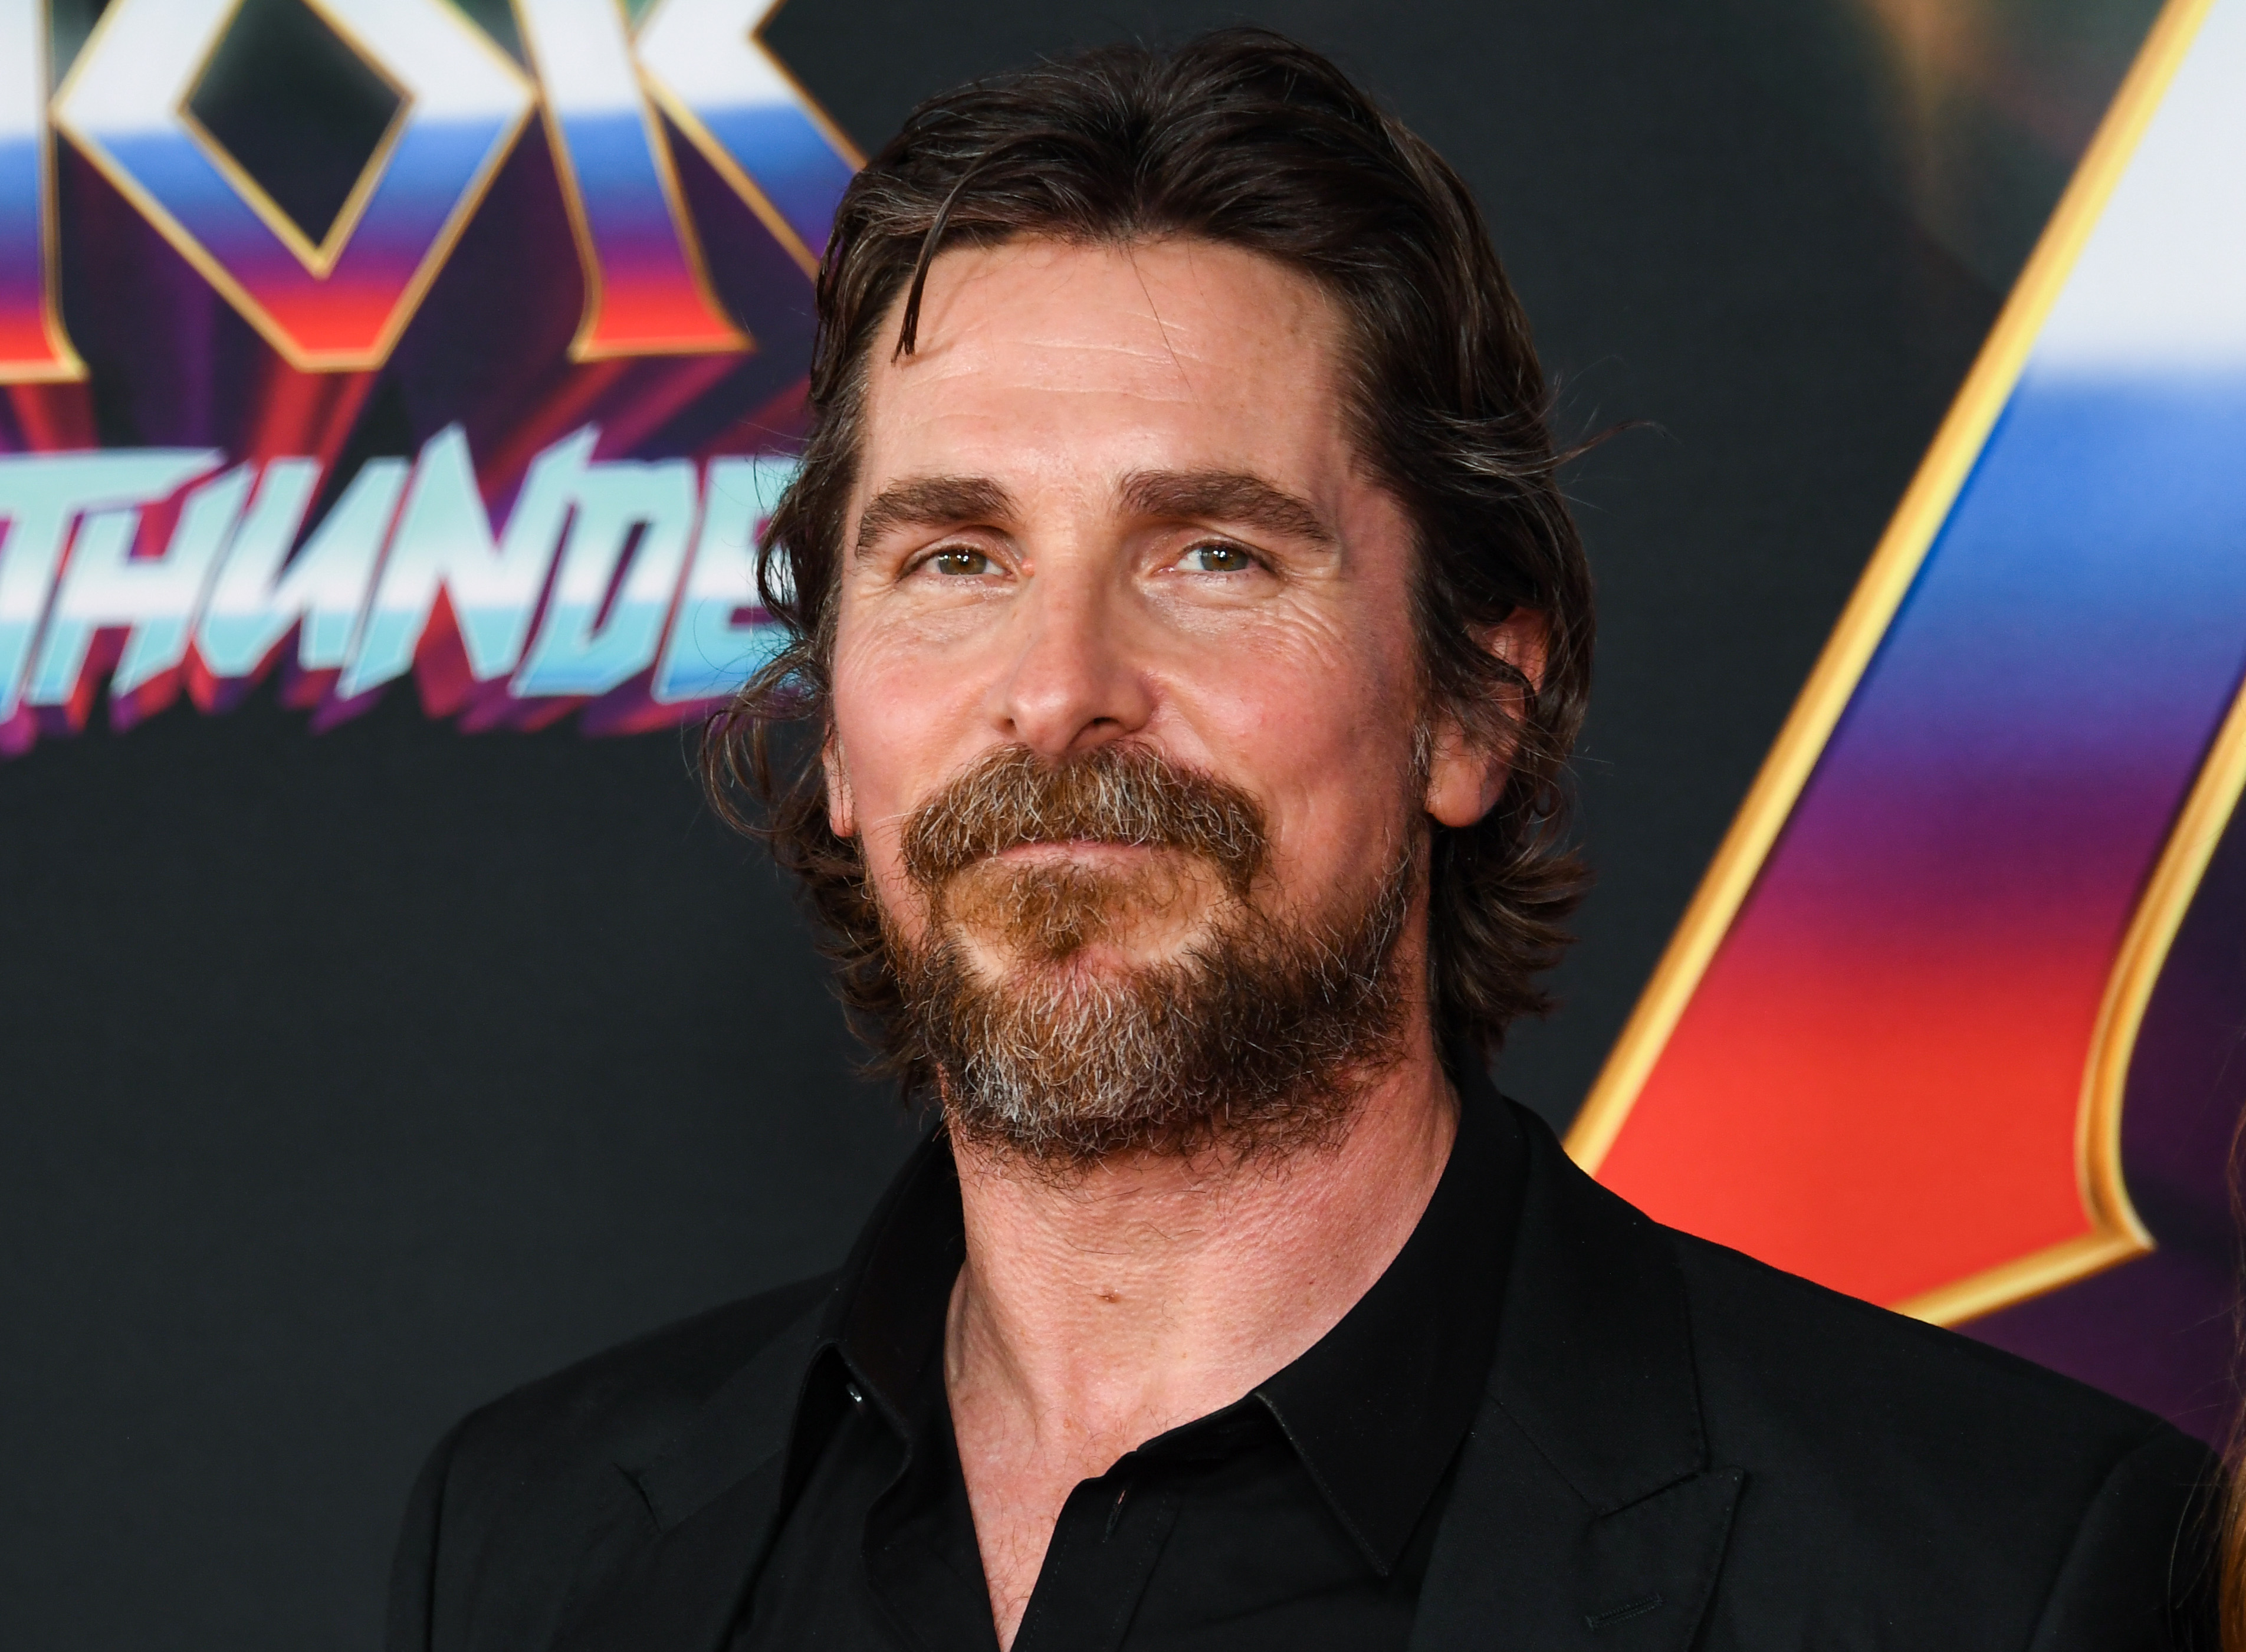 Christian Bale, who stars as Gorr the God Butcher in 'Thor: Love and Thunder,' wears a black suit over a black button-up shirt.